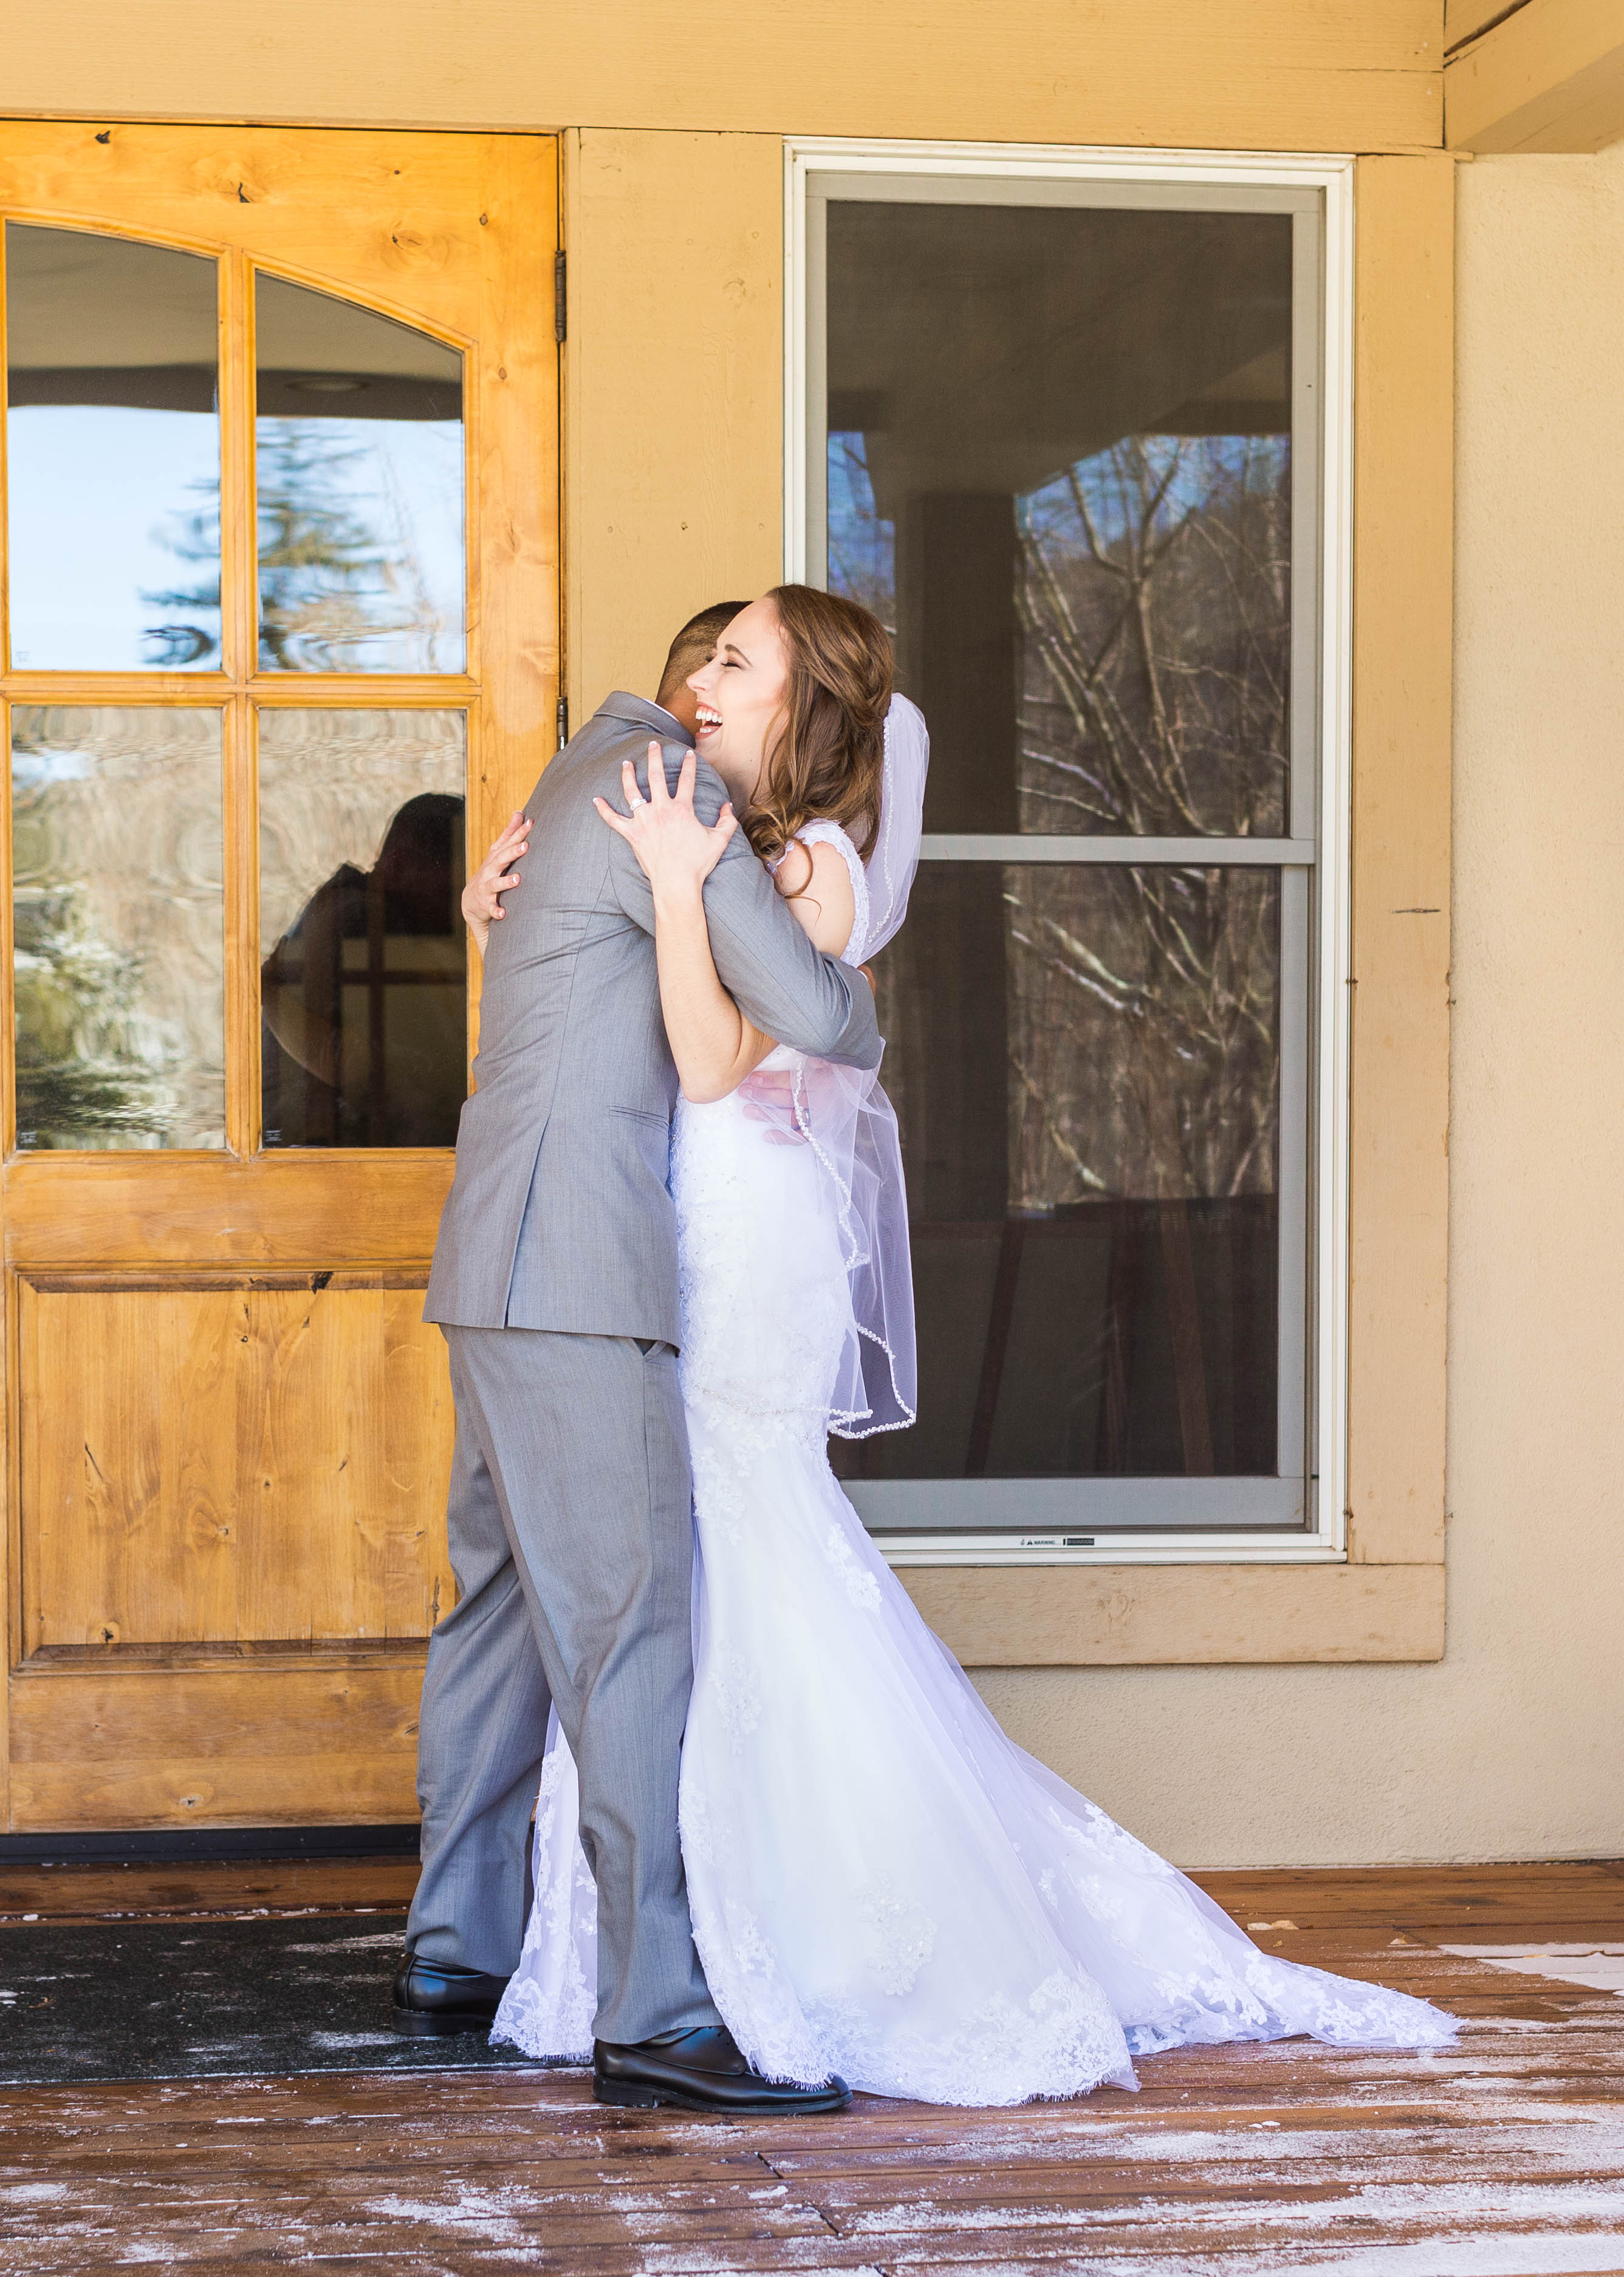 Bride and groom smile and embrace on front porch during their first look